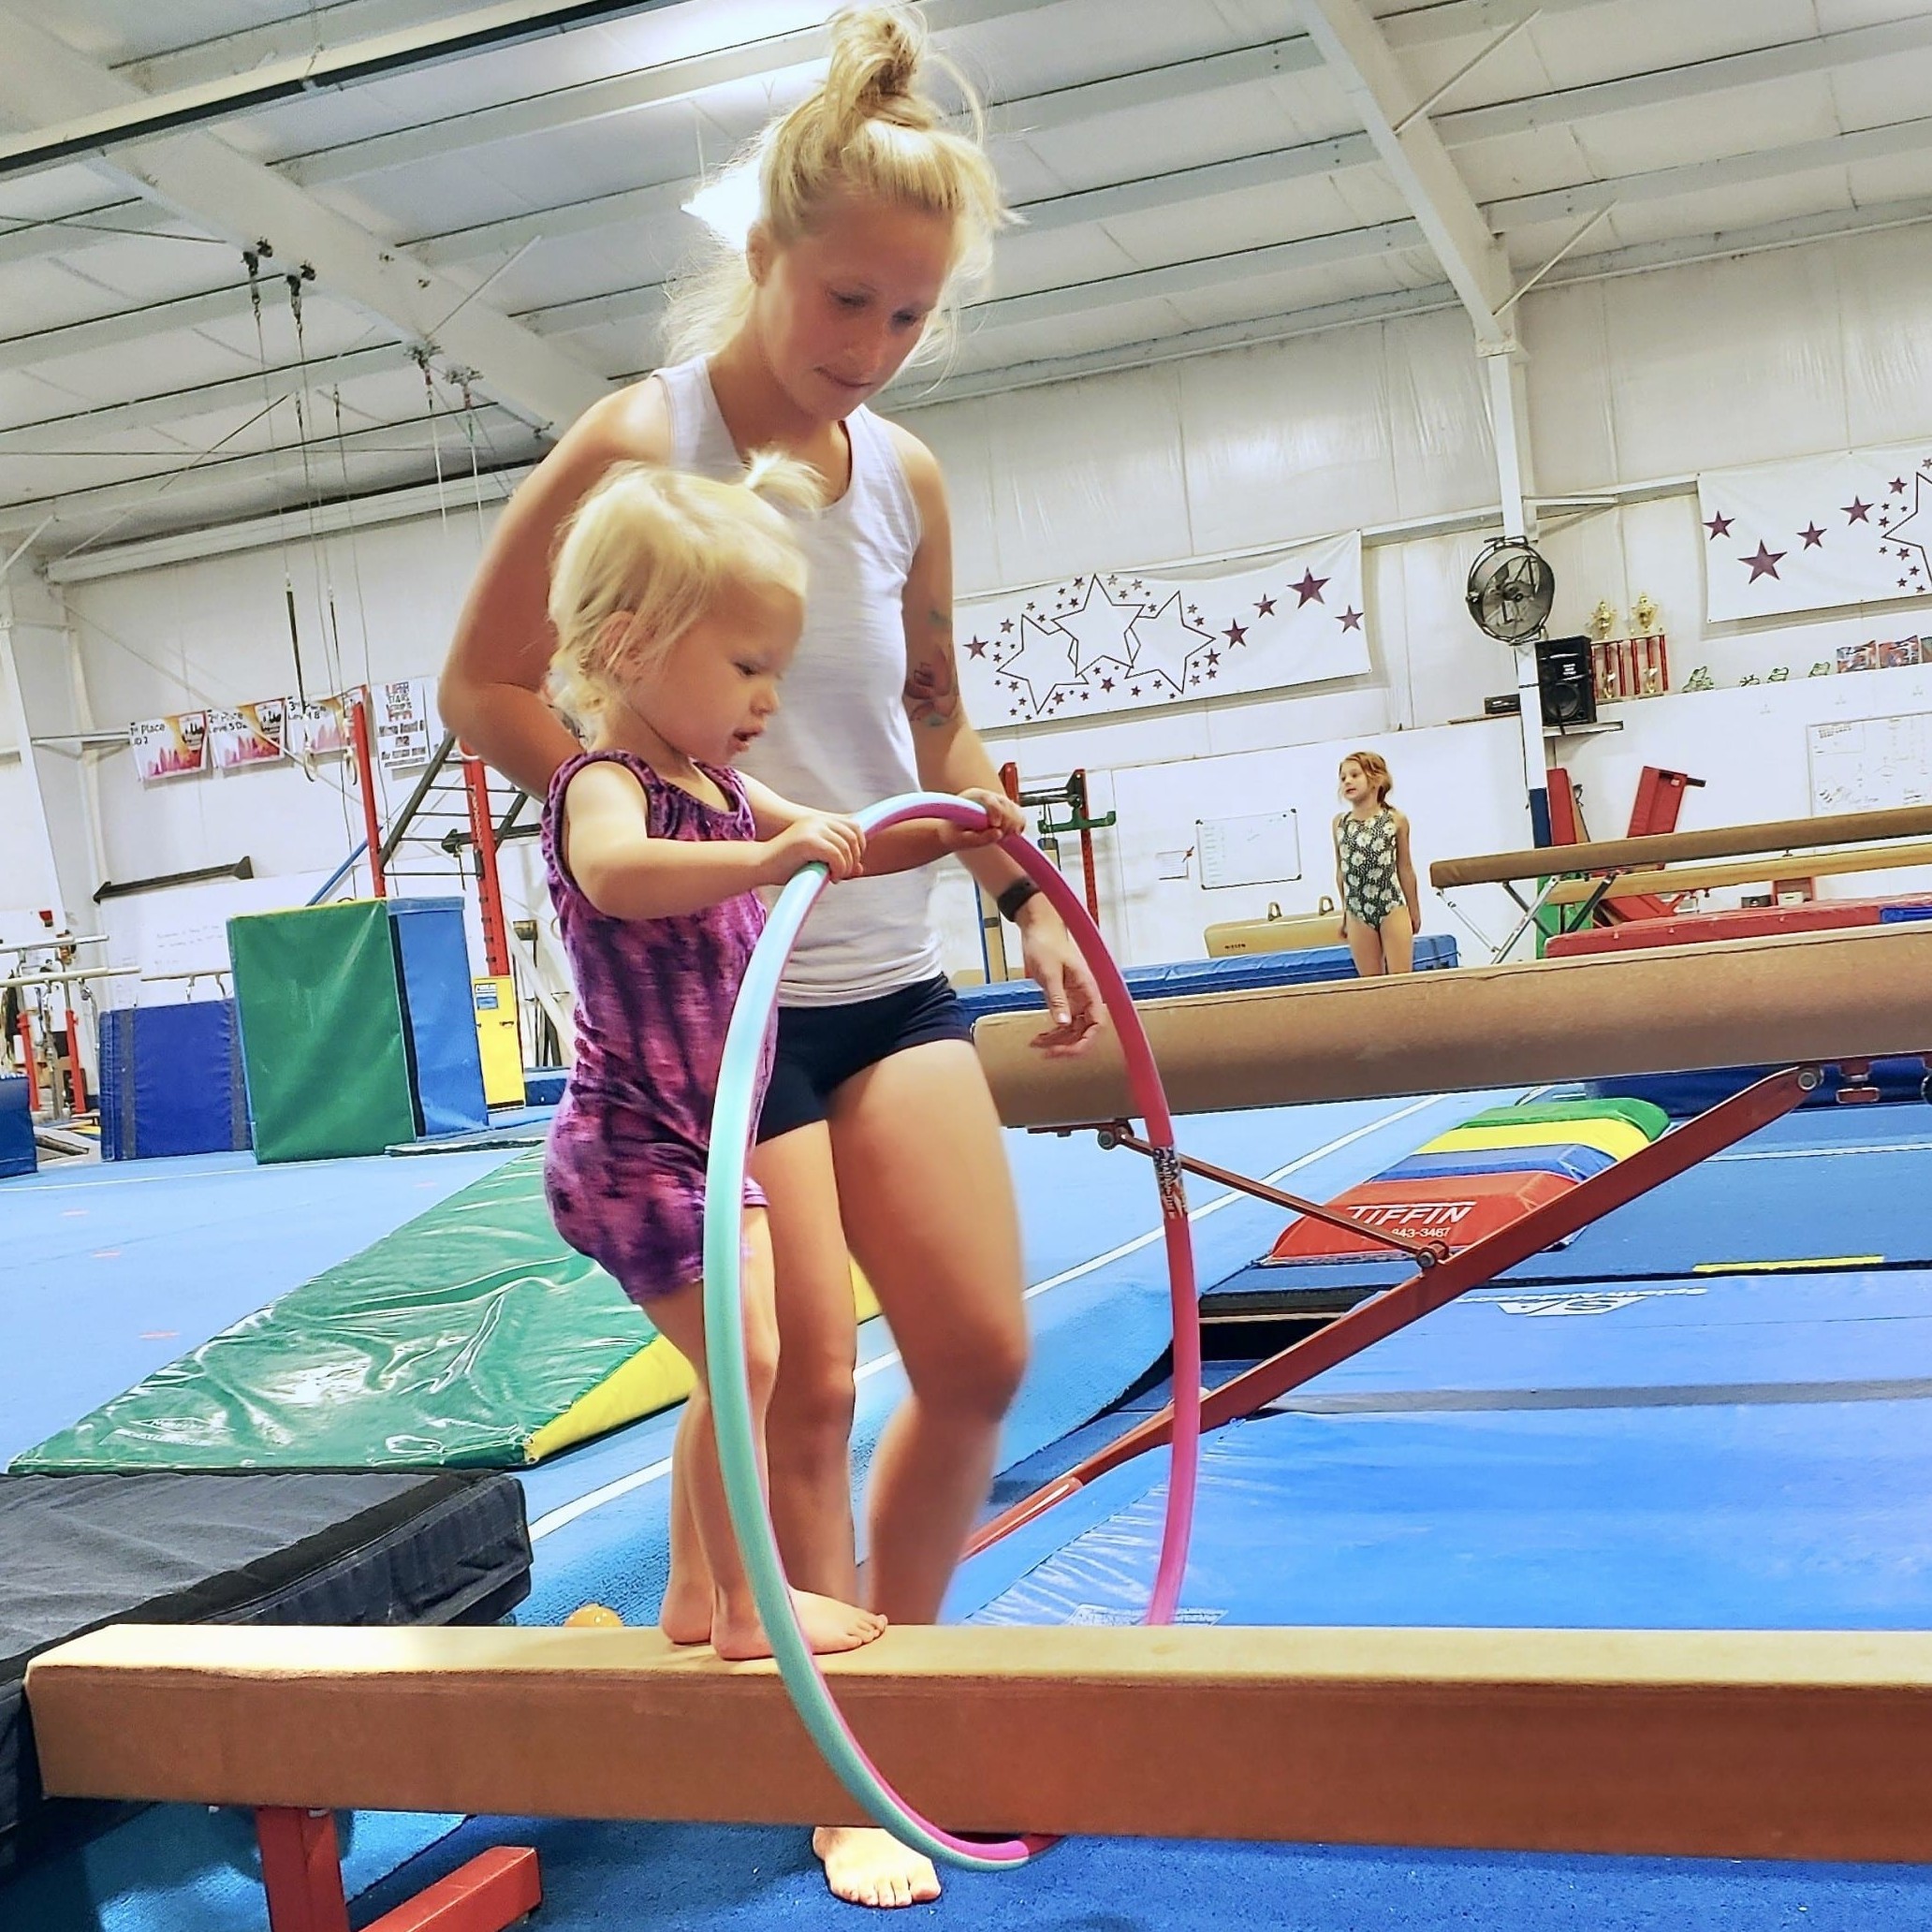 mom and daughter in toddler gymnastics on balance beam